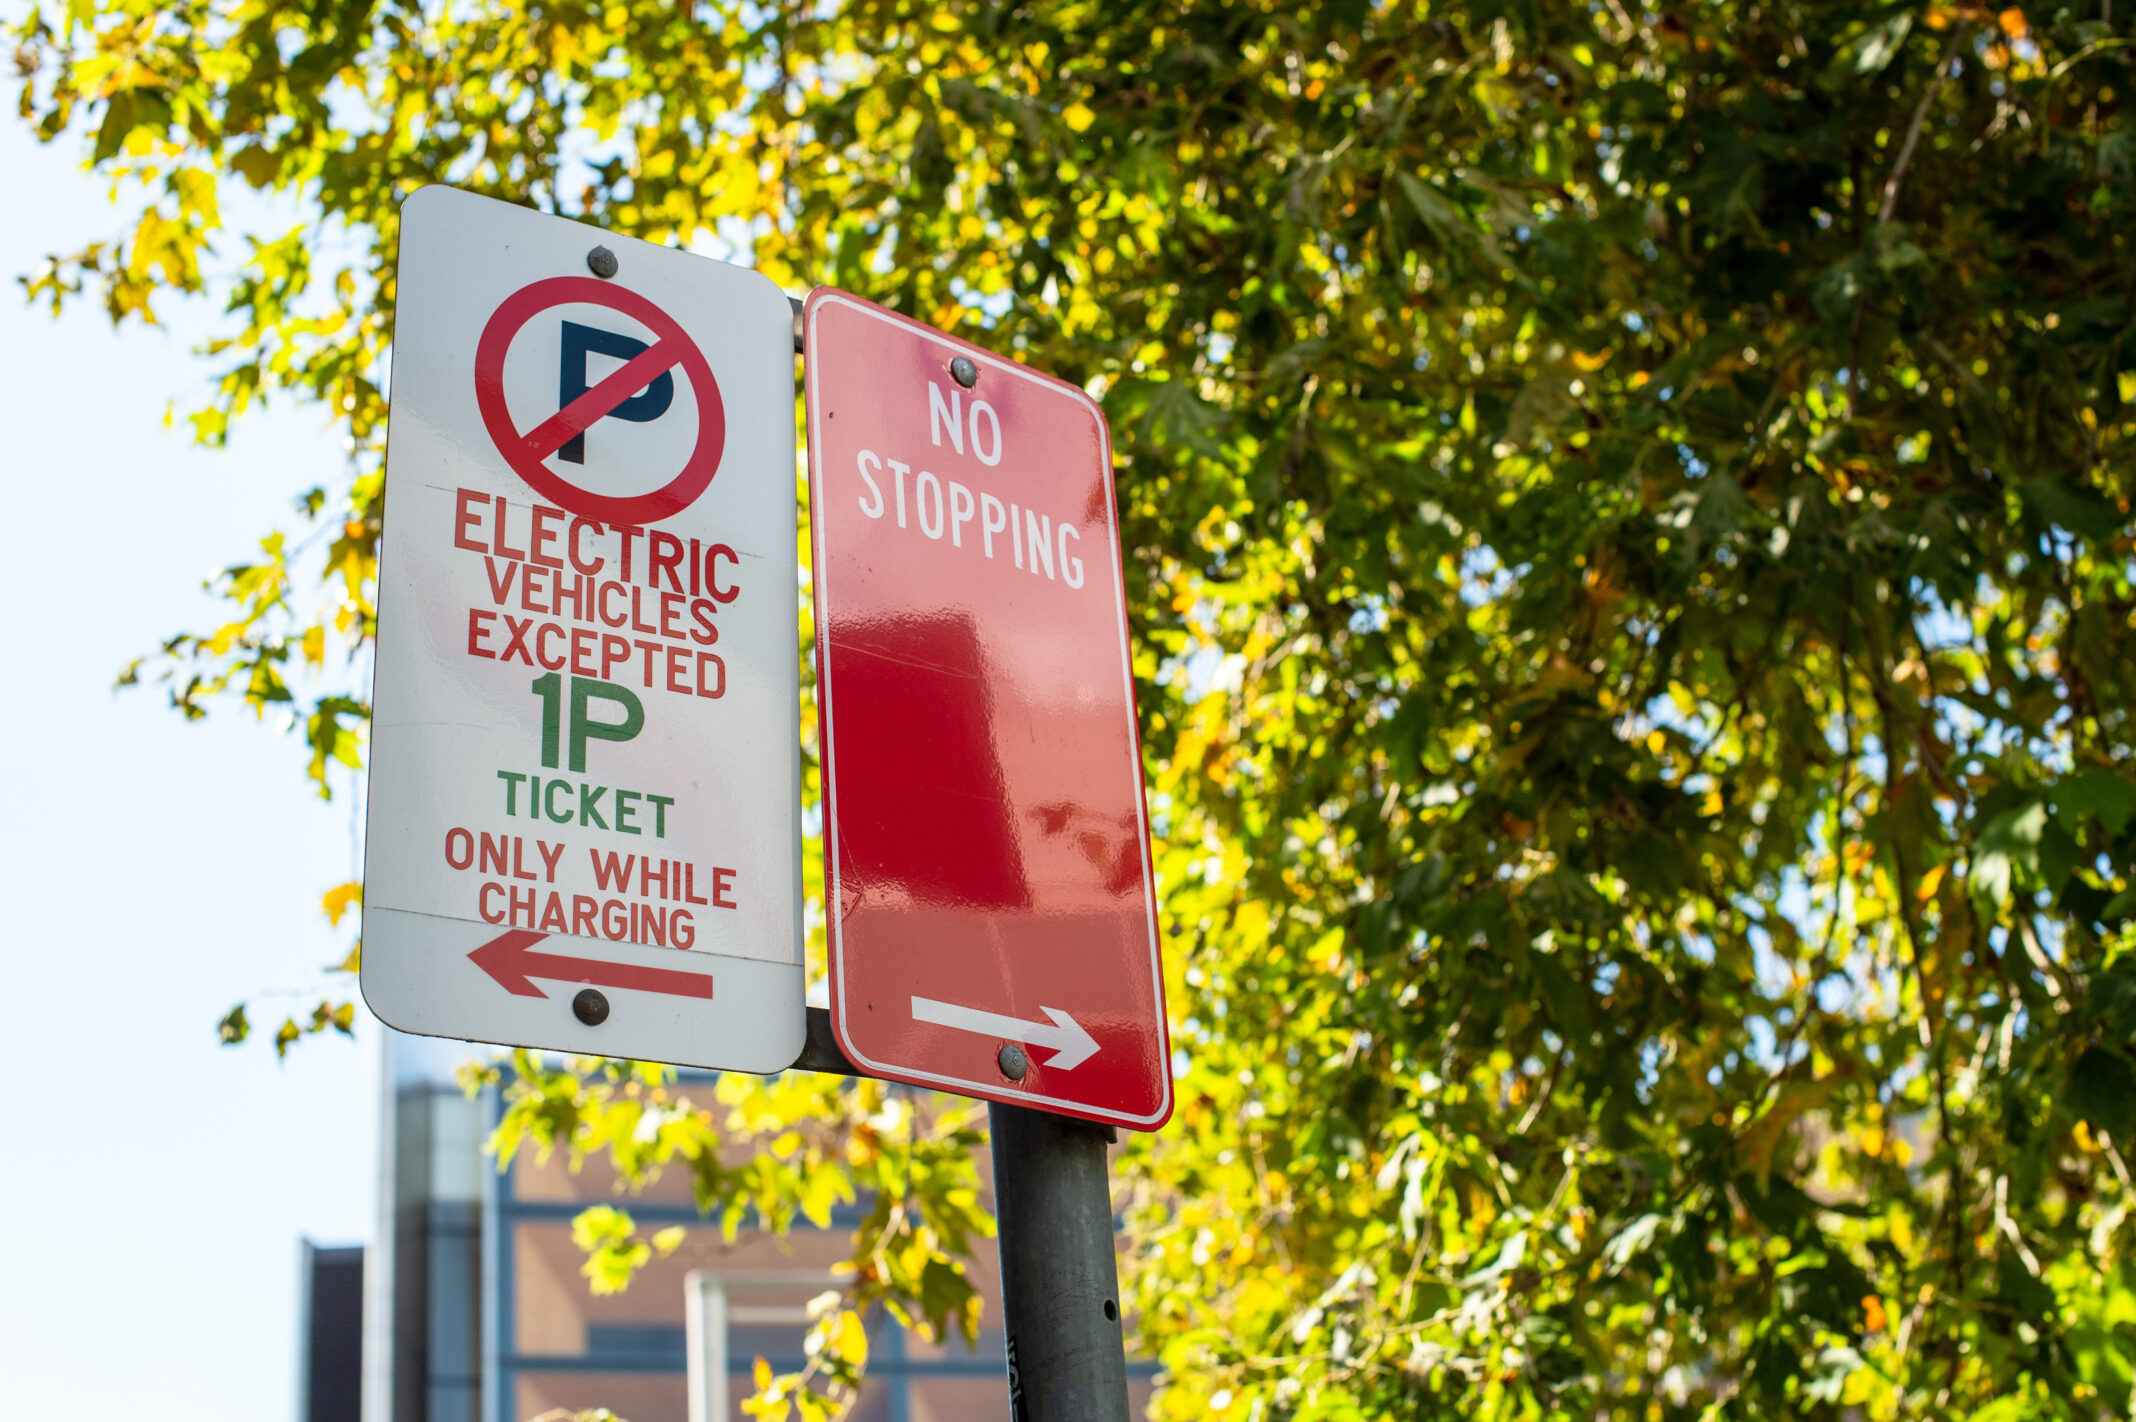 ELECTRIC VEHICLE PARKING SIGN